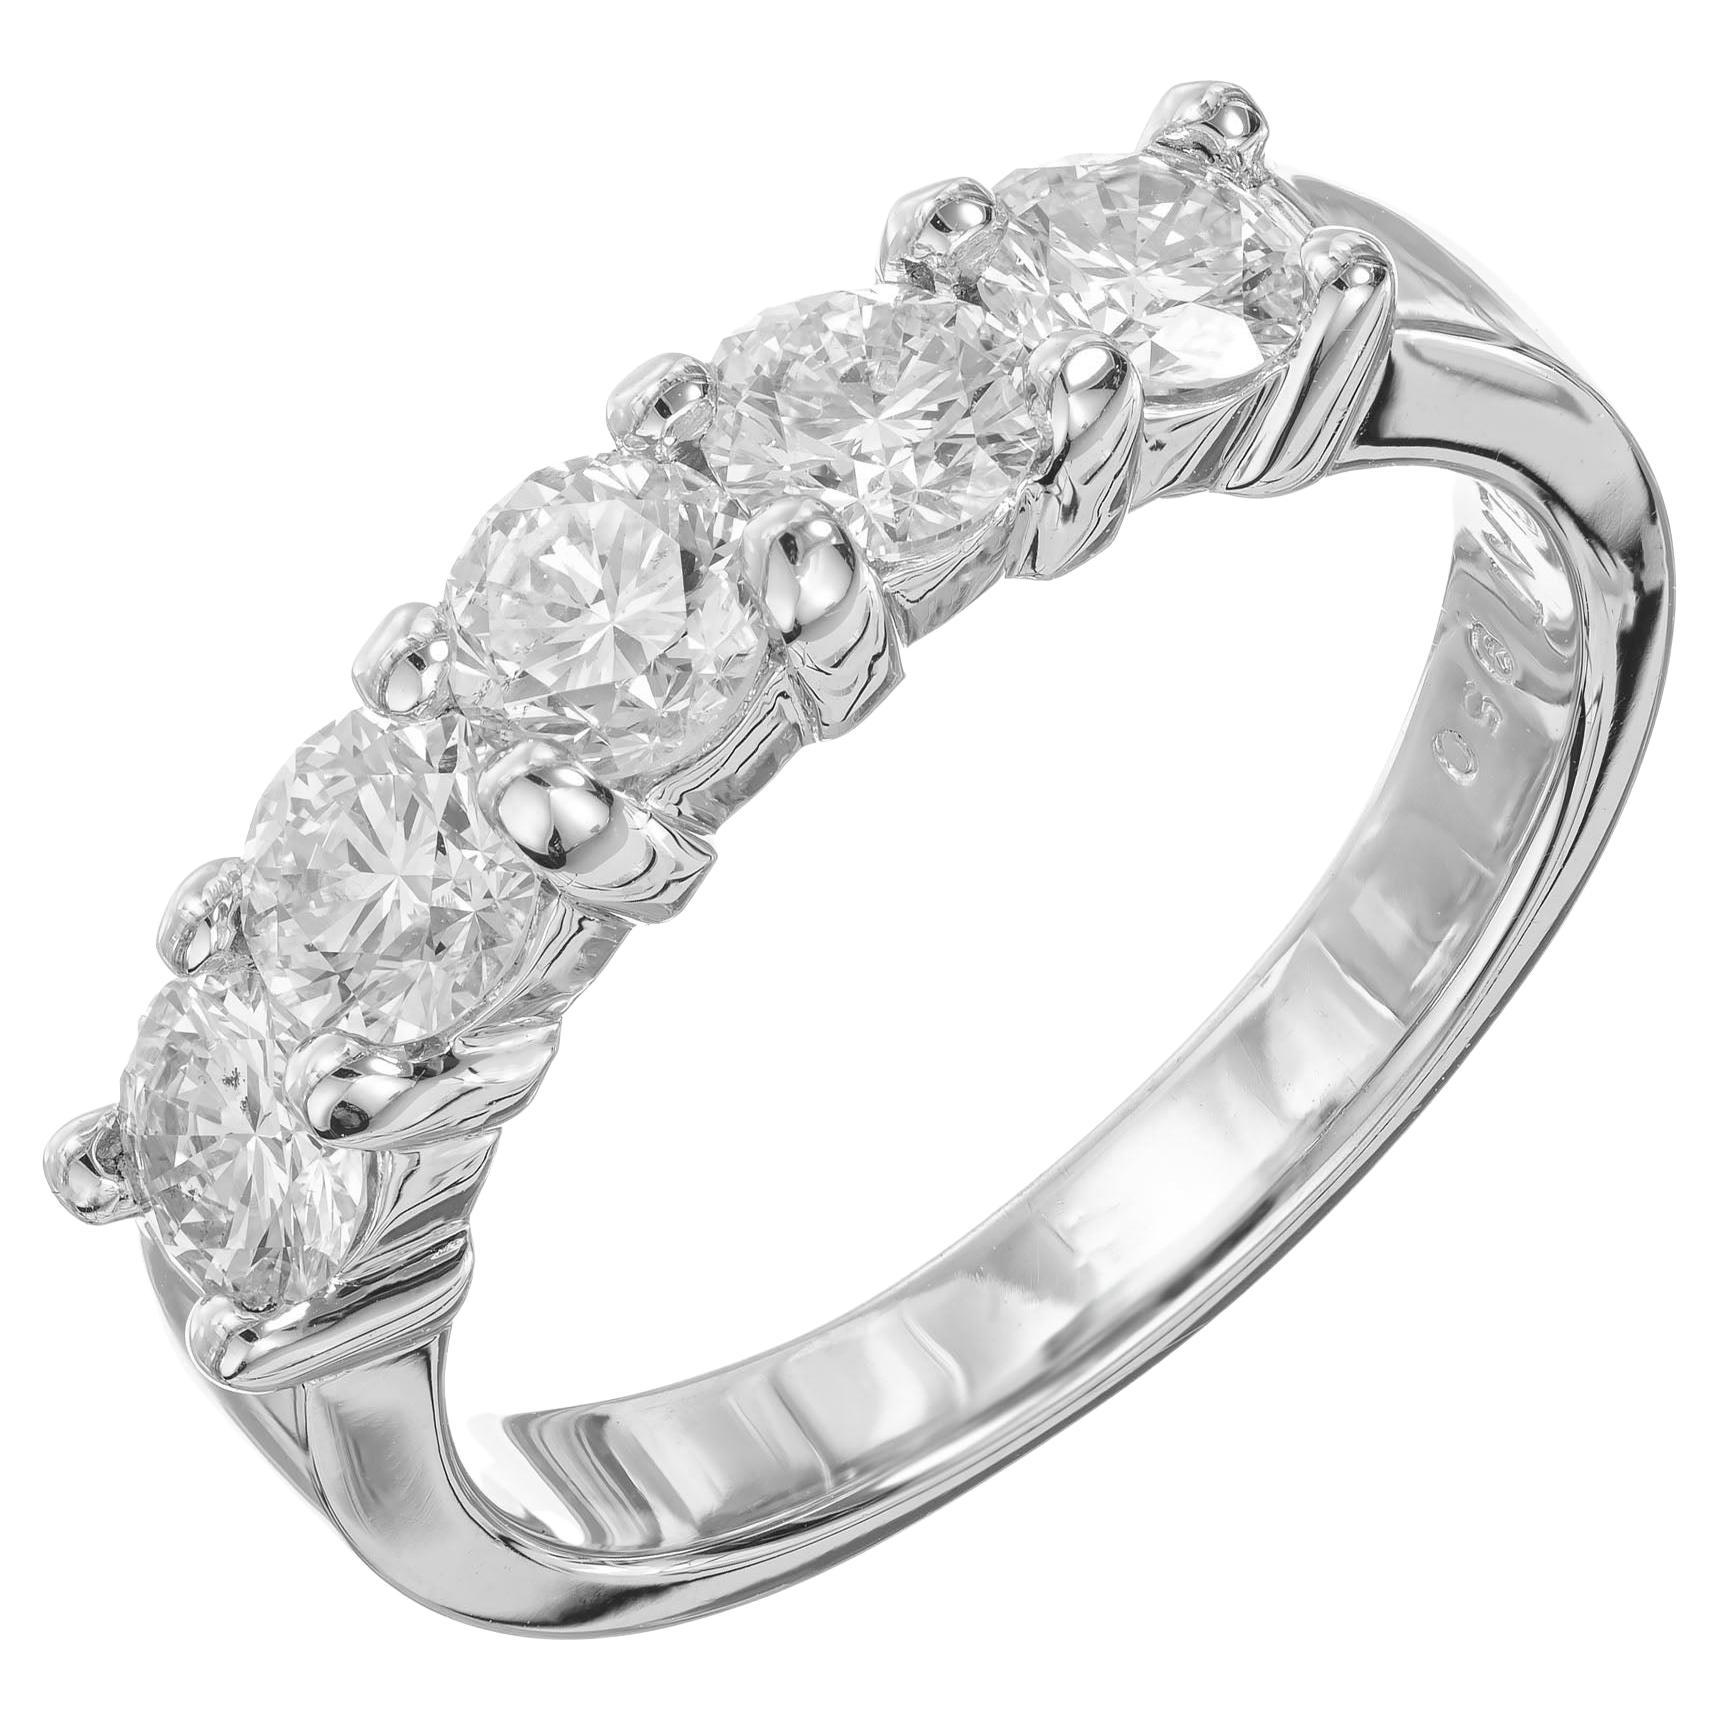 Peter Suchy 1.25 Carat Diamond Platinum Common Prong Wedding Band Ring For Sale